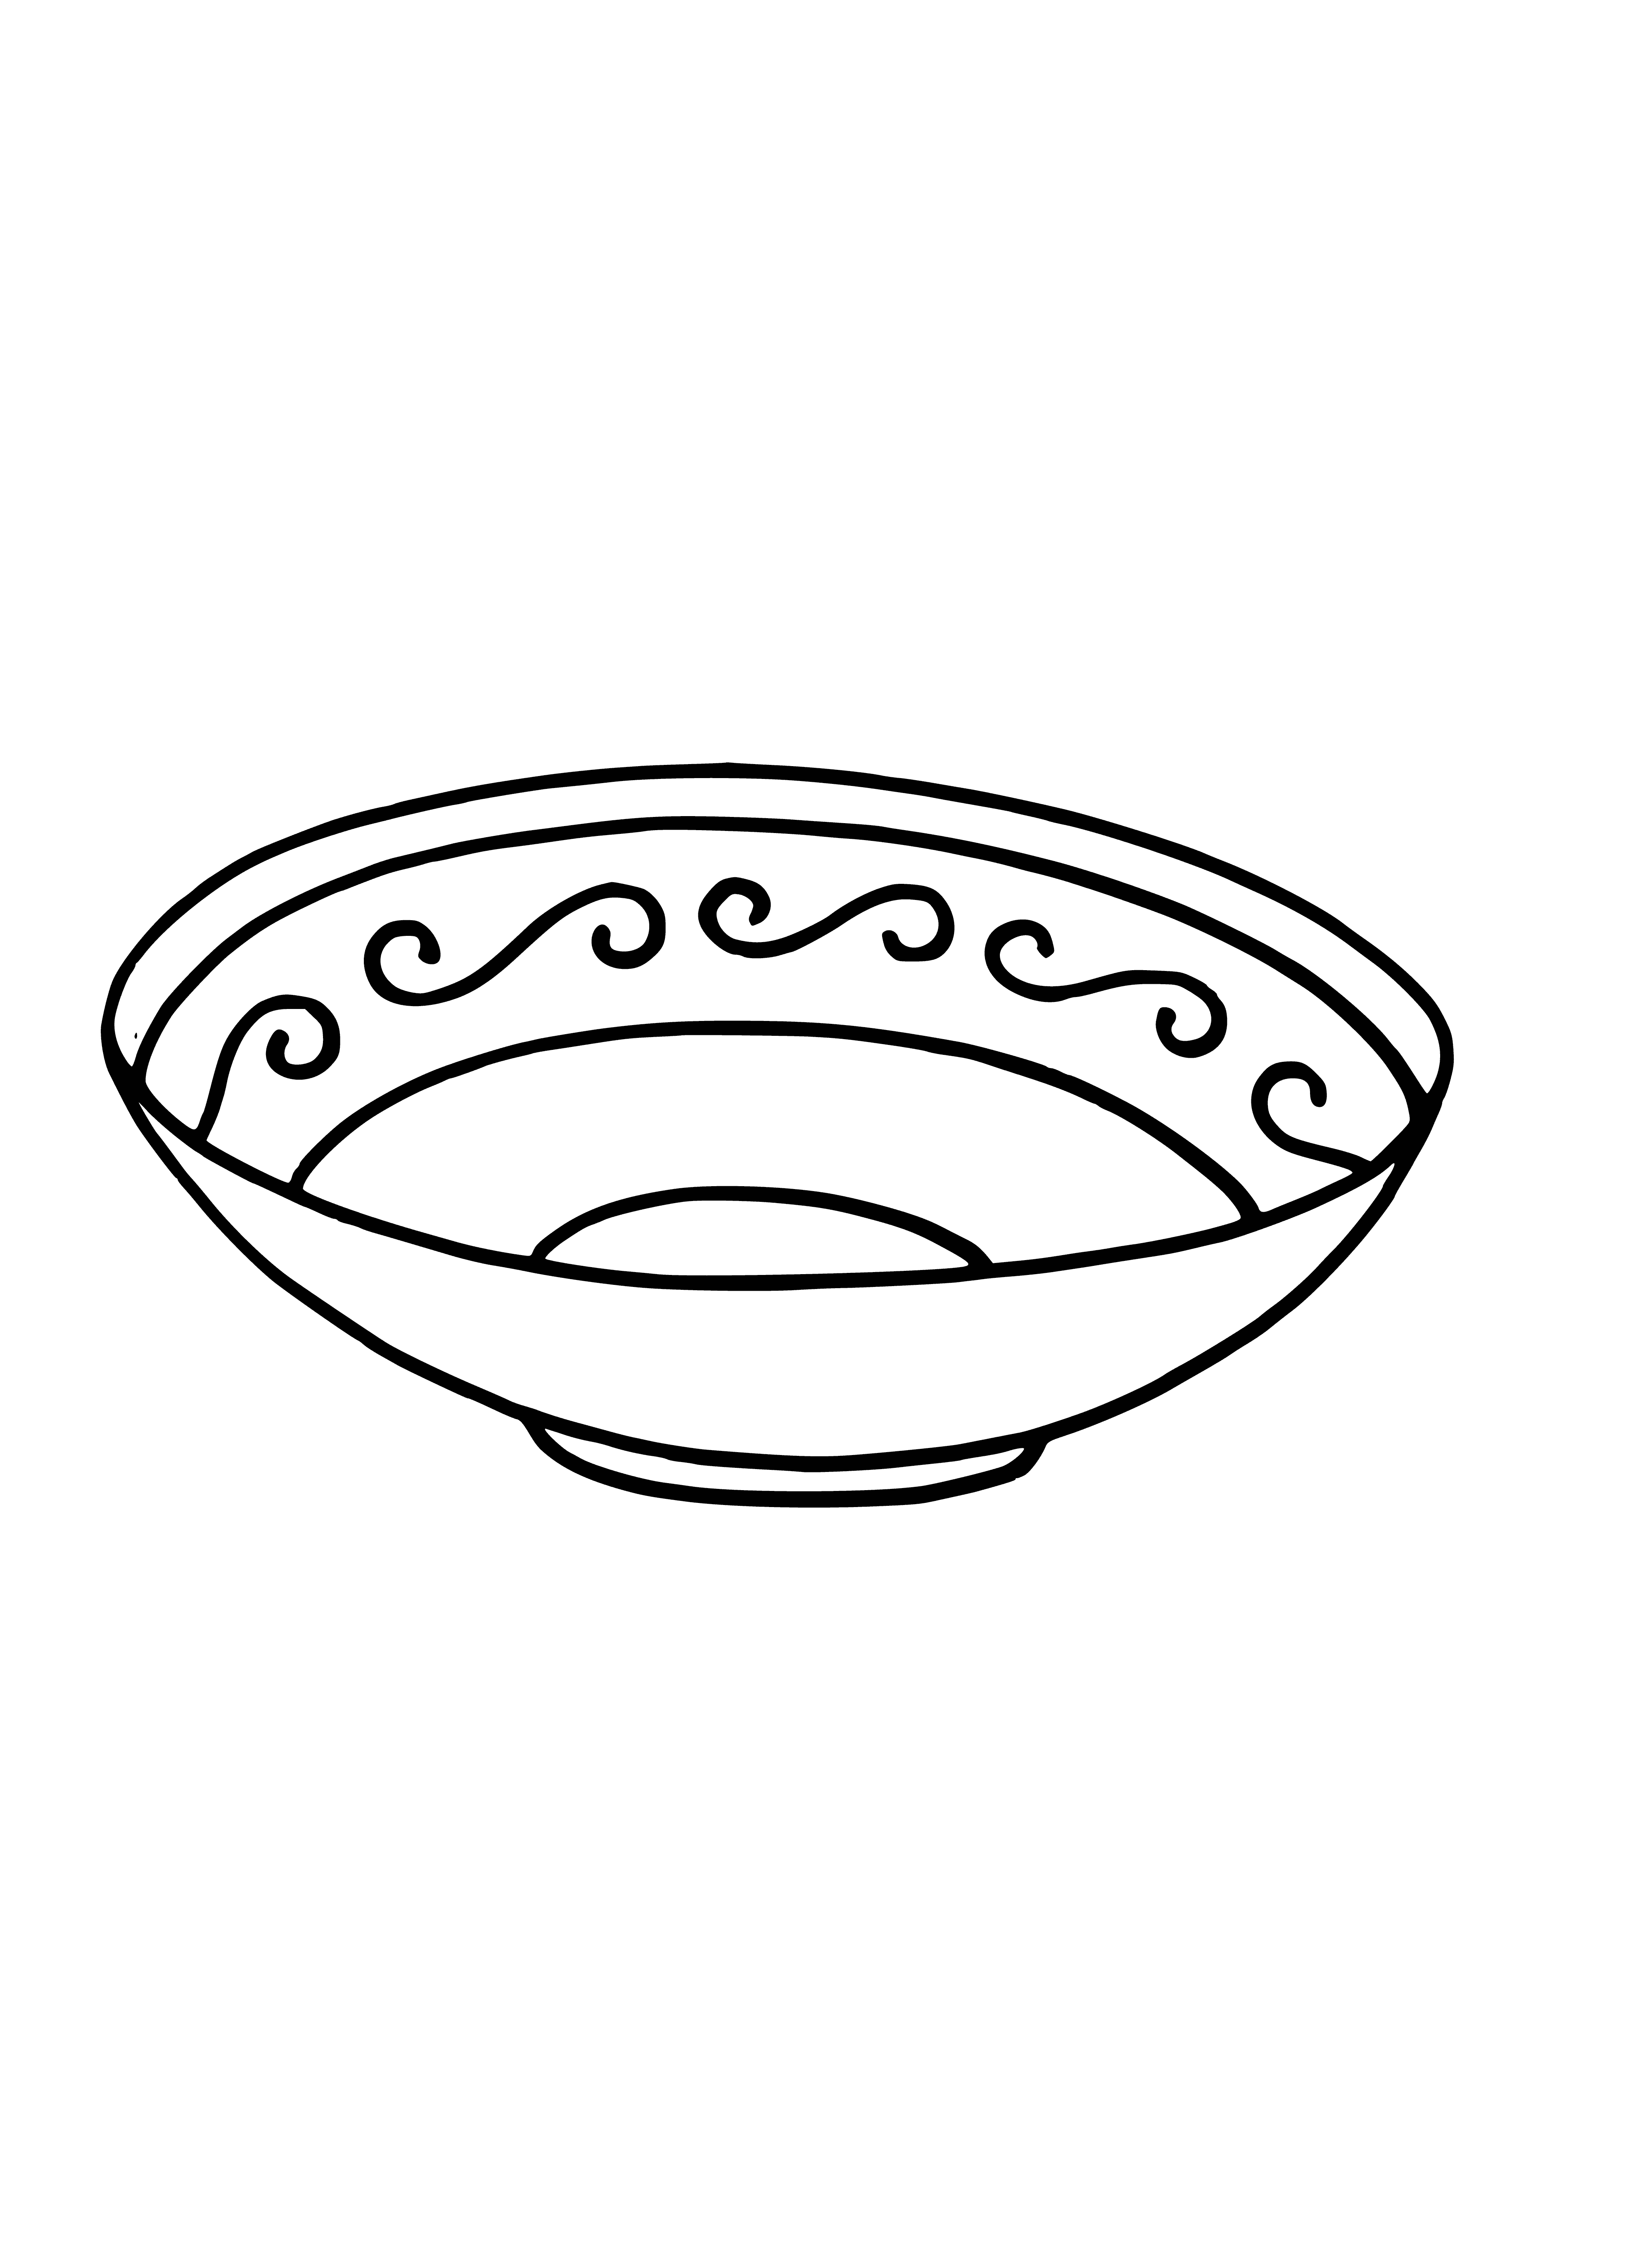 Soup plate coloring page